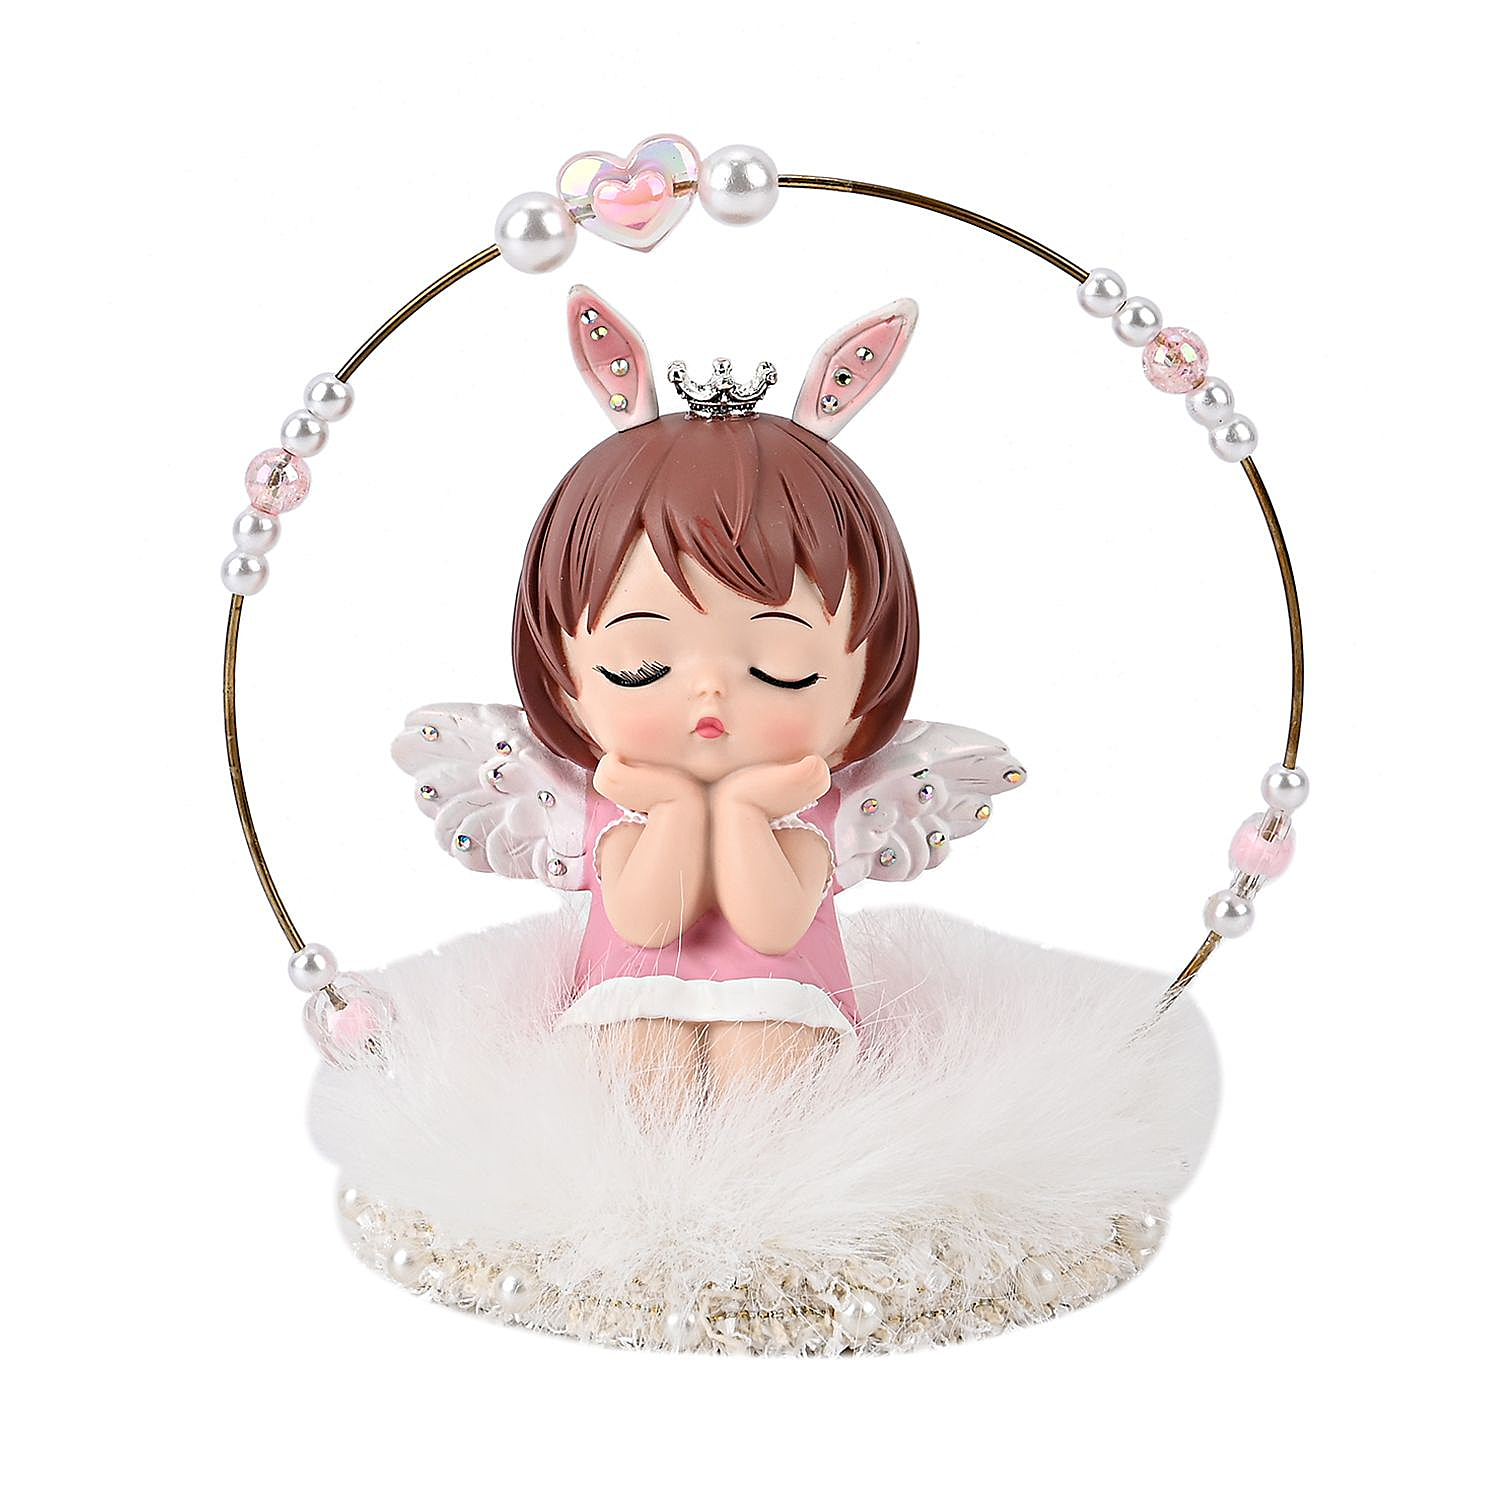 Aesthetic Sleeping Angel Tabletop Decoration With Bunny Ears & Crown on Her Head  (Size 14x13x10 cm) - Pink & White